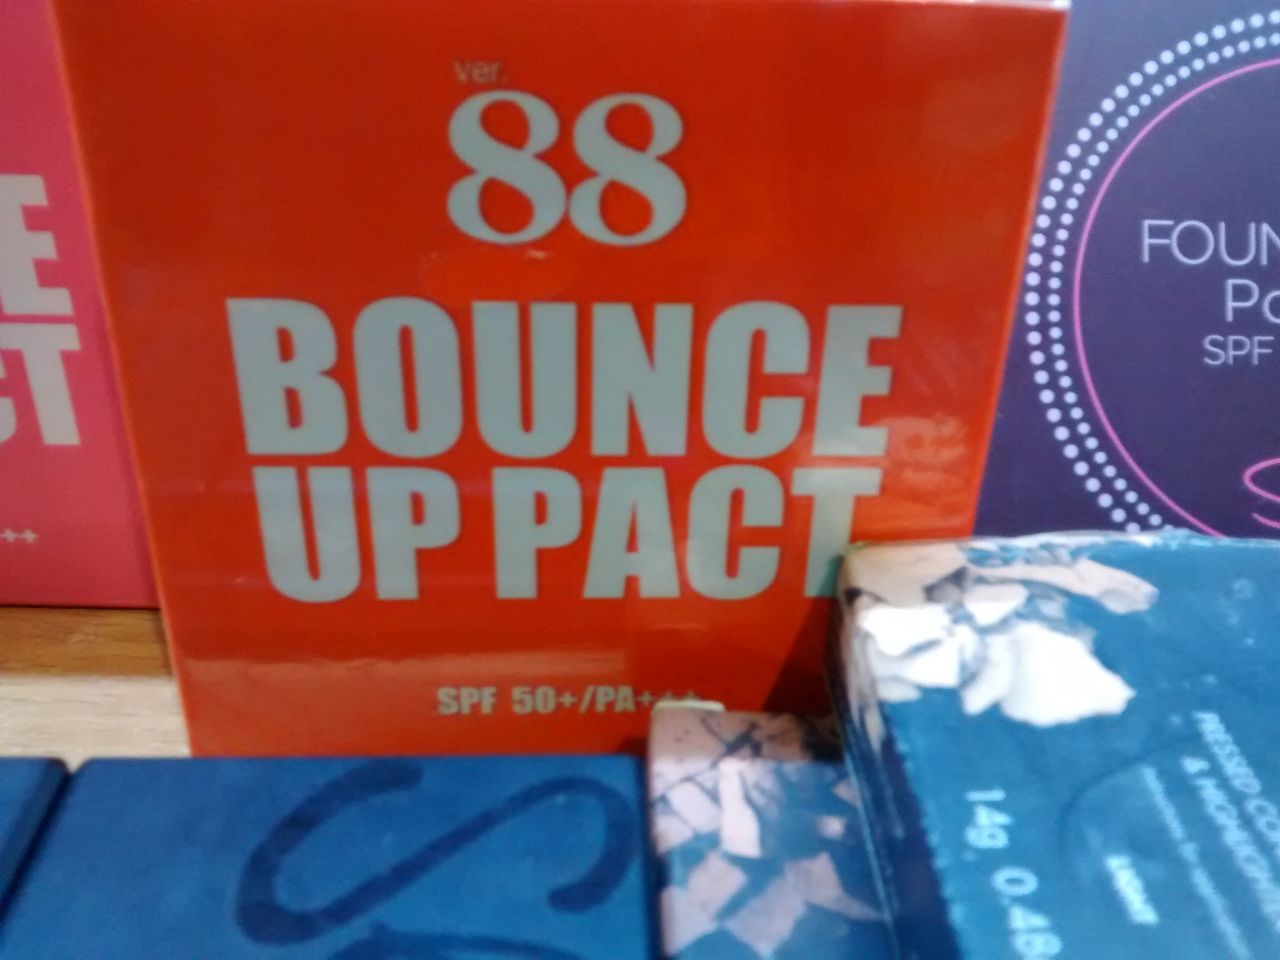 88 Bounce up Pact